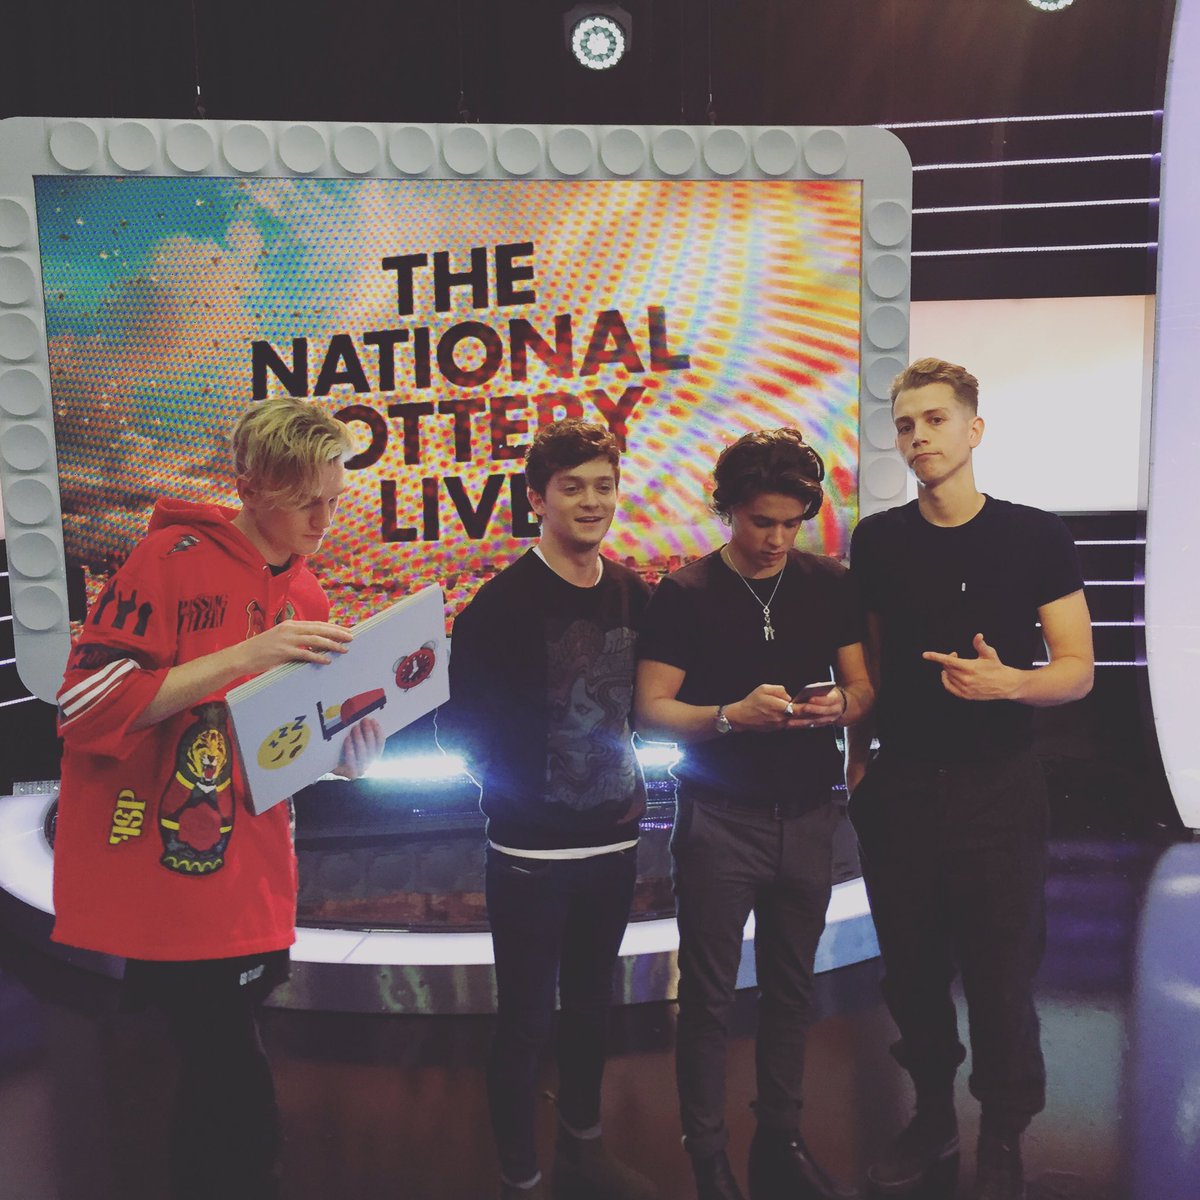 Who enjoyed the clip of the new All Night video @NationalLottery